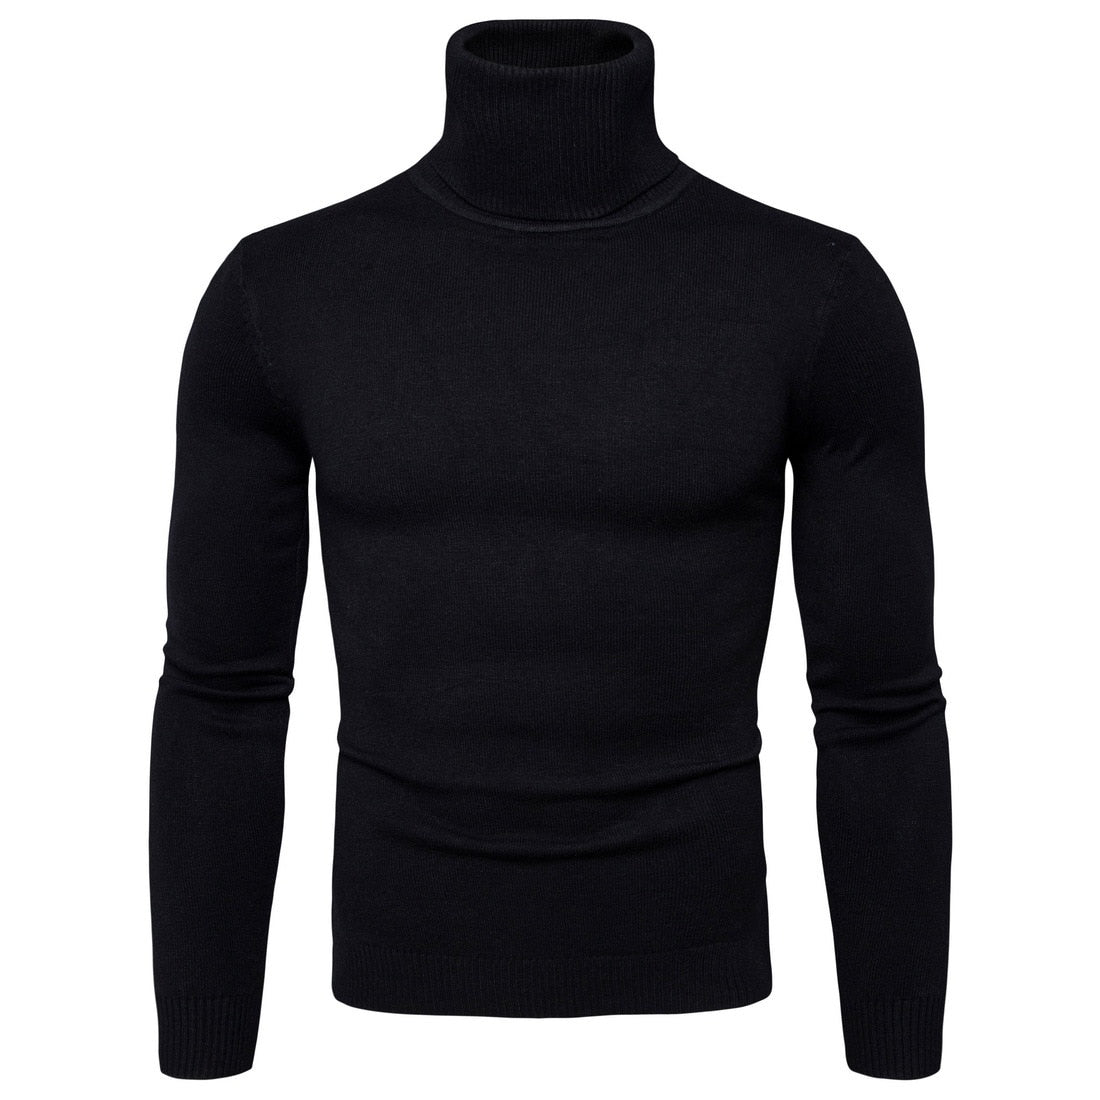 FAVOCENT Winter Warm Turtleneck Sweater Men Fashion Solid Knitted Mens Sweaters 2020 Casual Male Double Collar Slim Fit Pullover